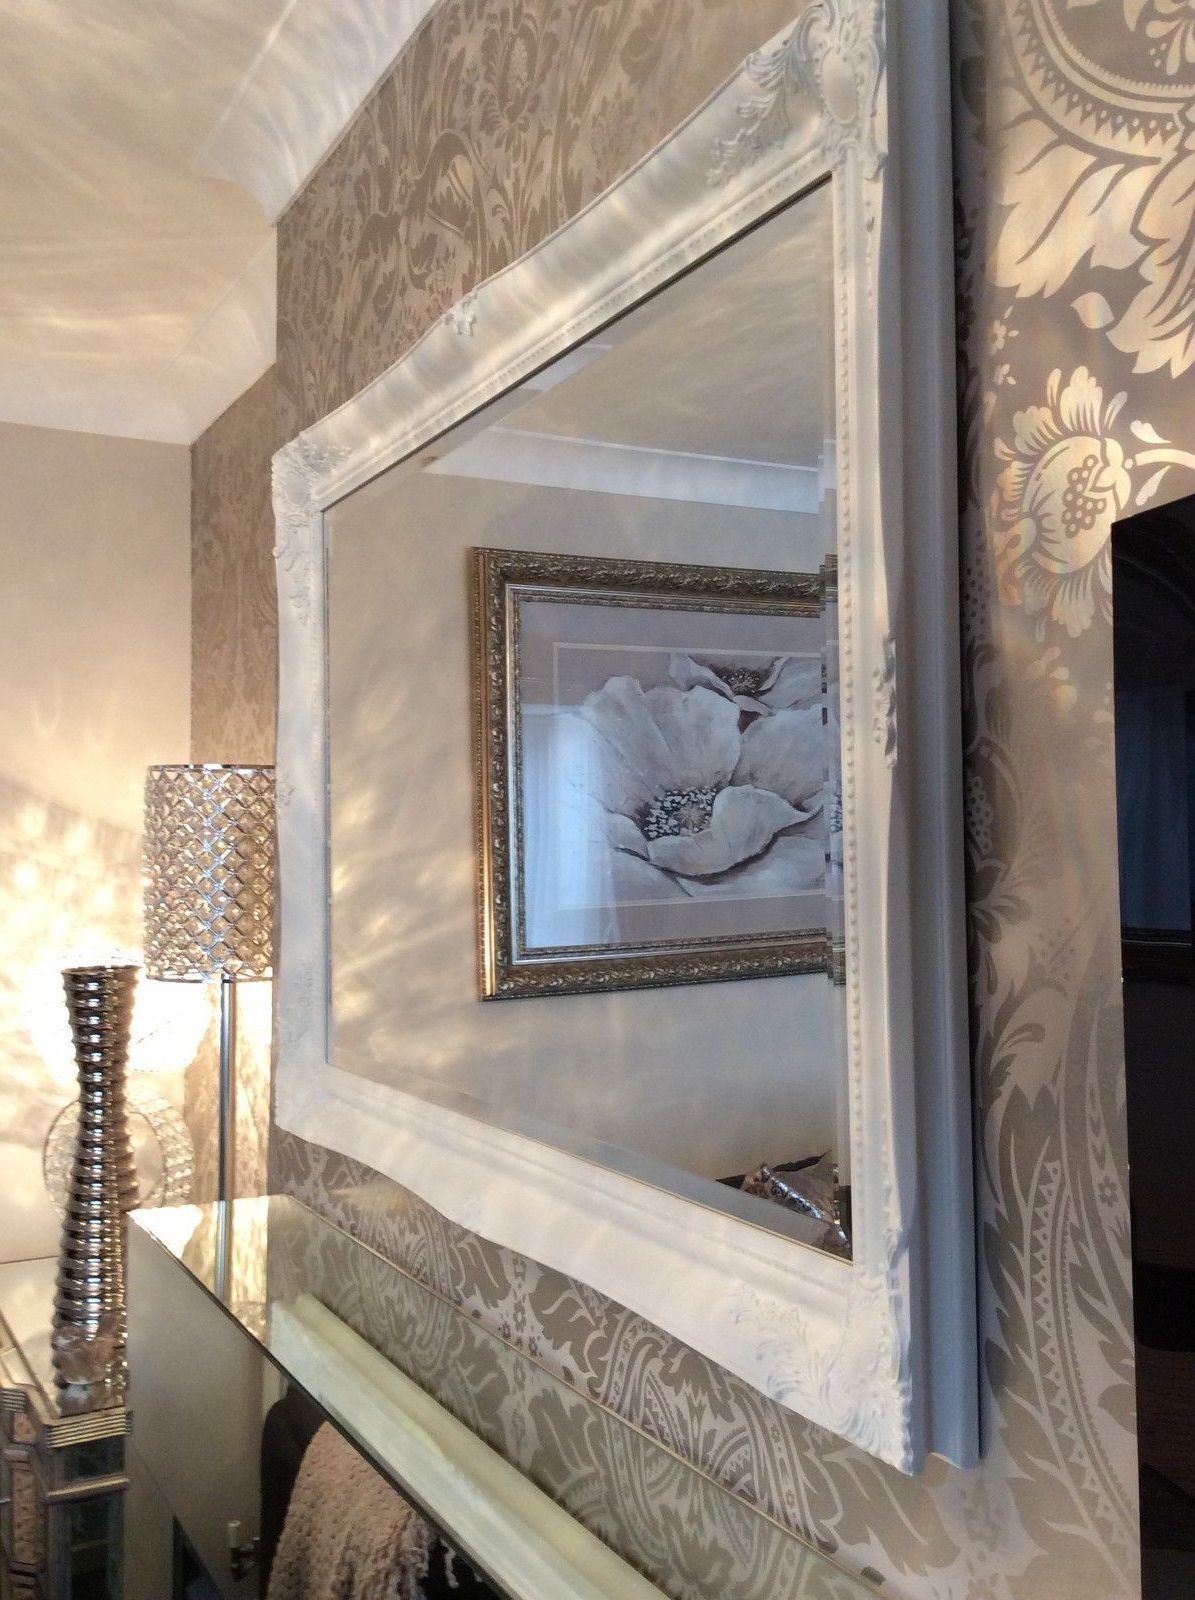 Large Wall Mirrors Decorative: Reflections Of Style And Beauty